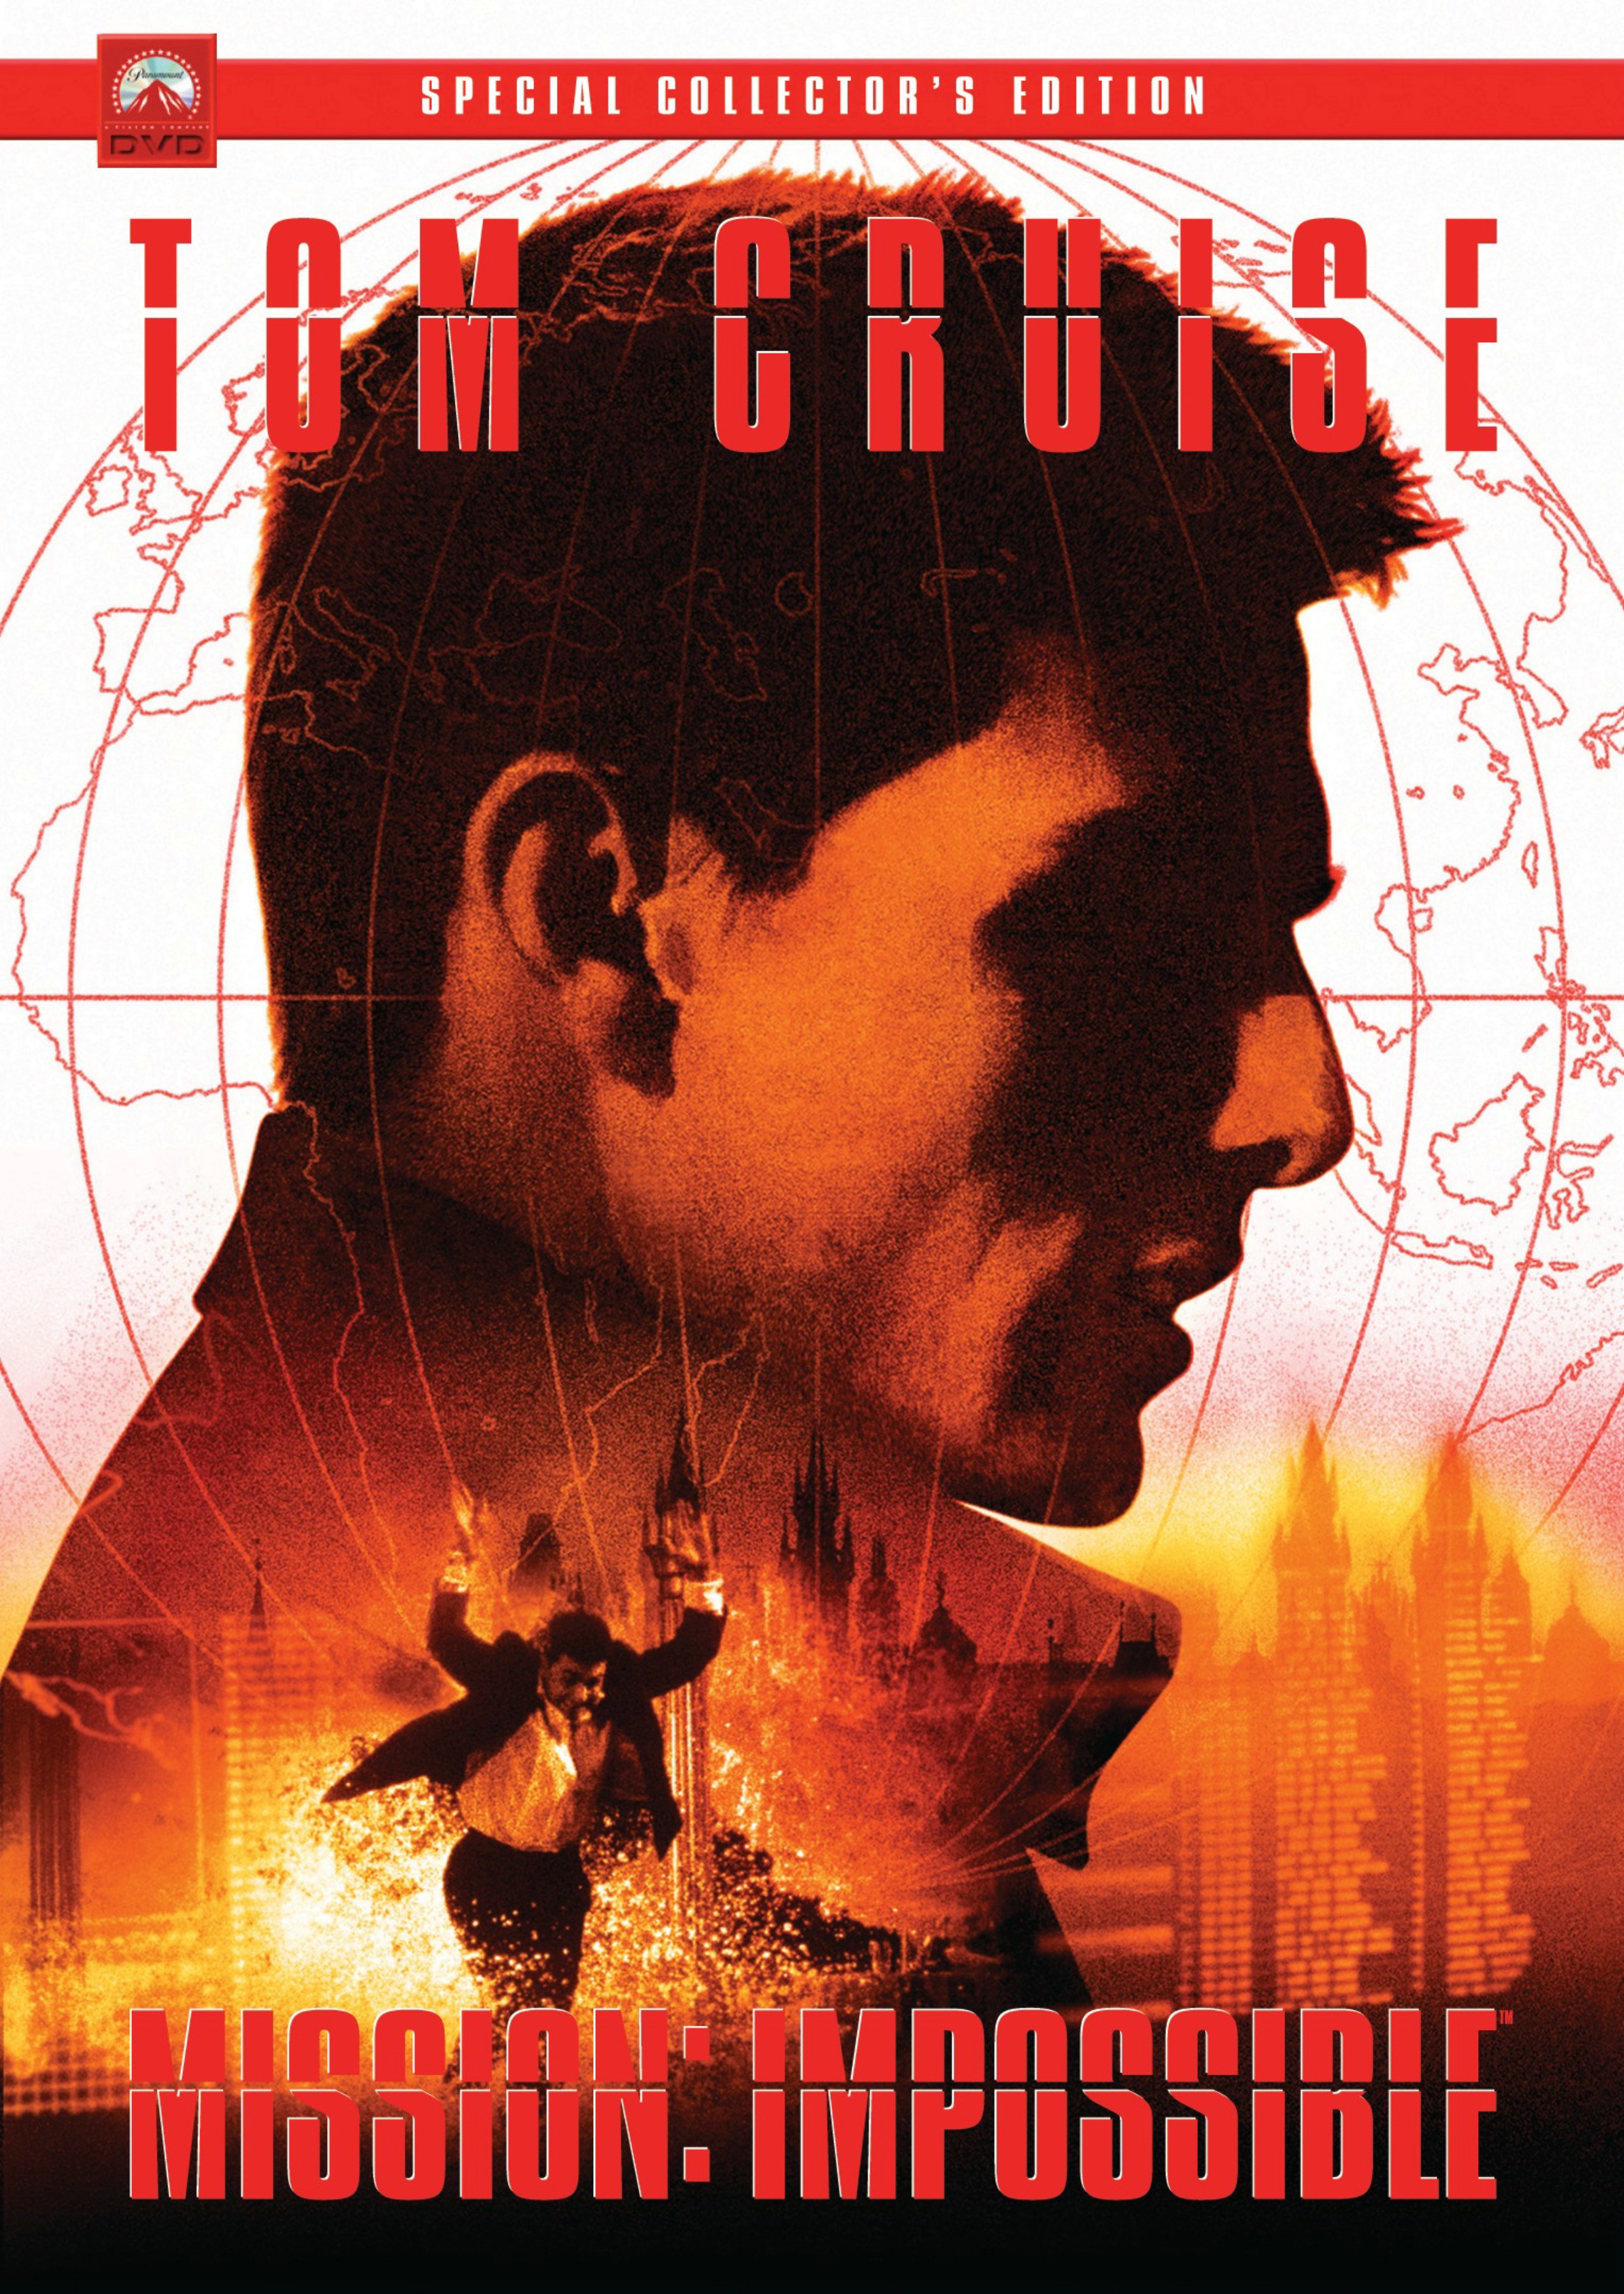 Mission: Impossible [Special Collector' Edition] [DVD] [1996]